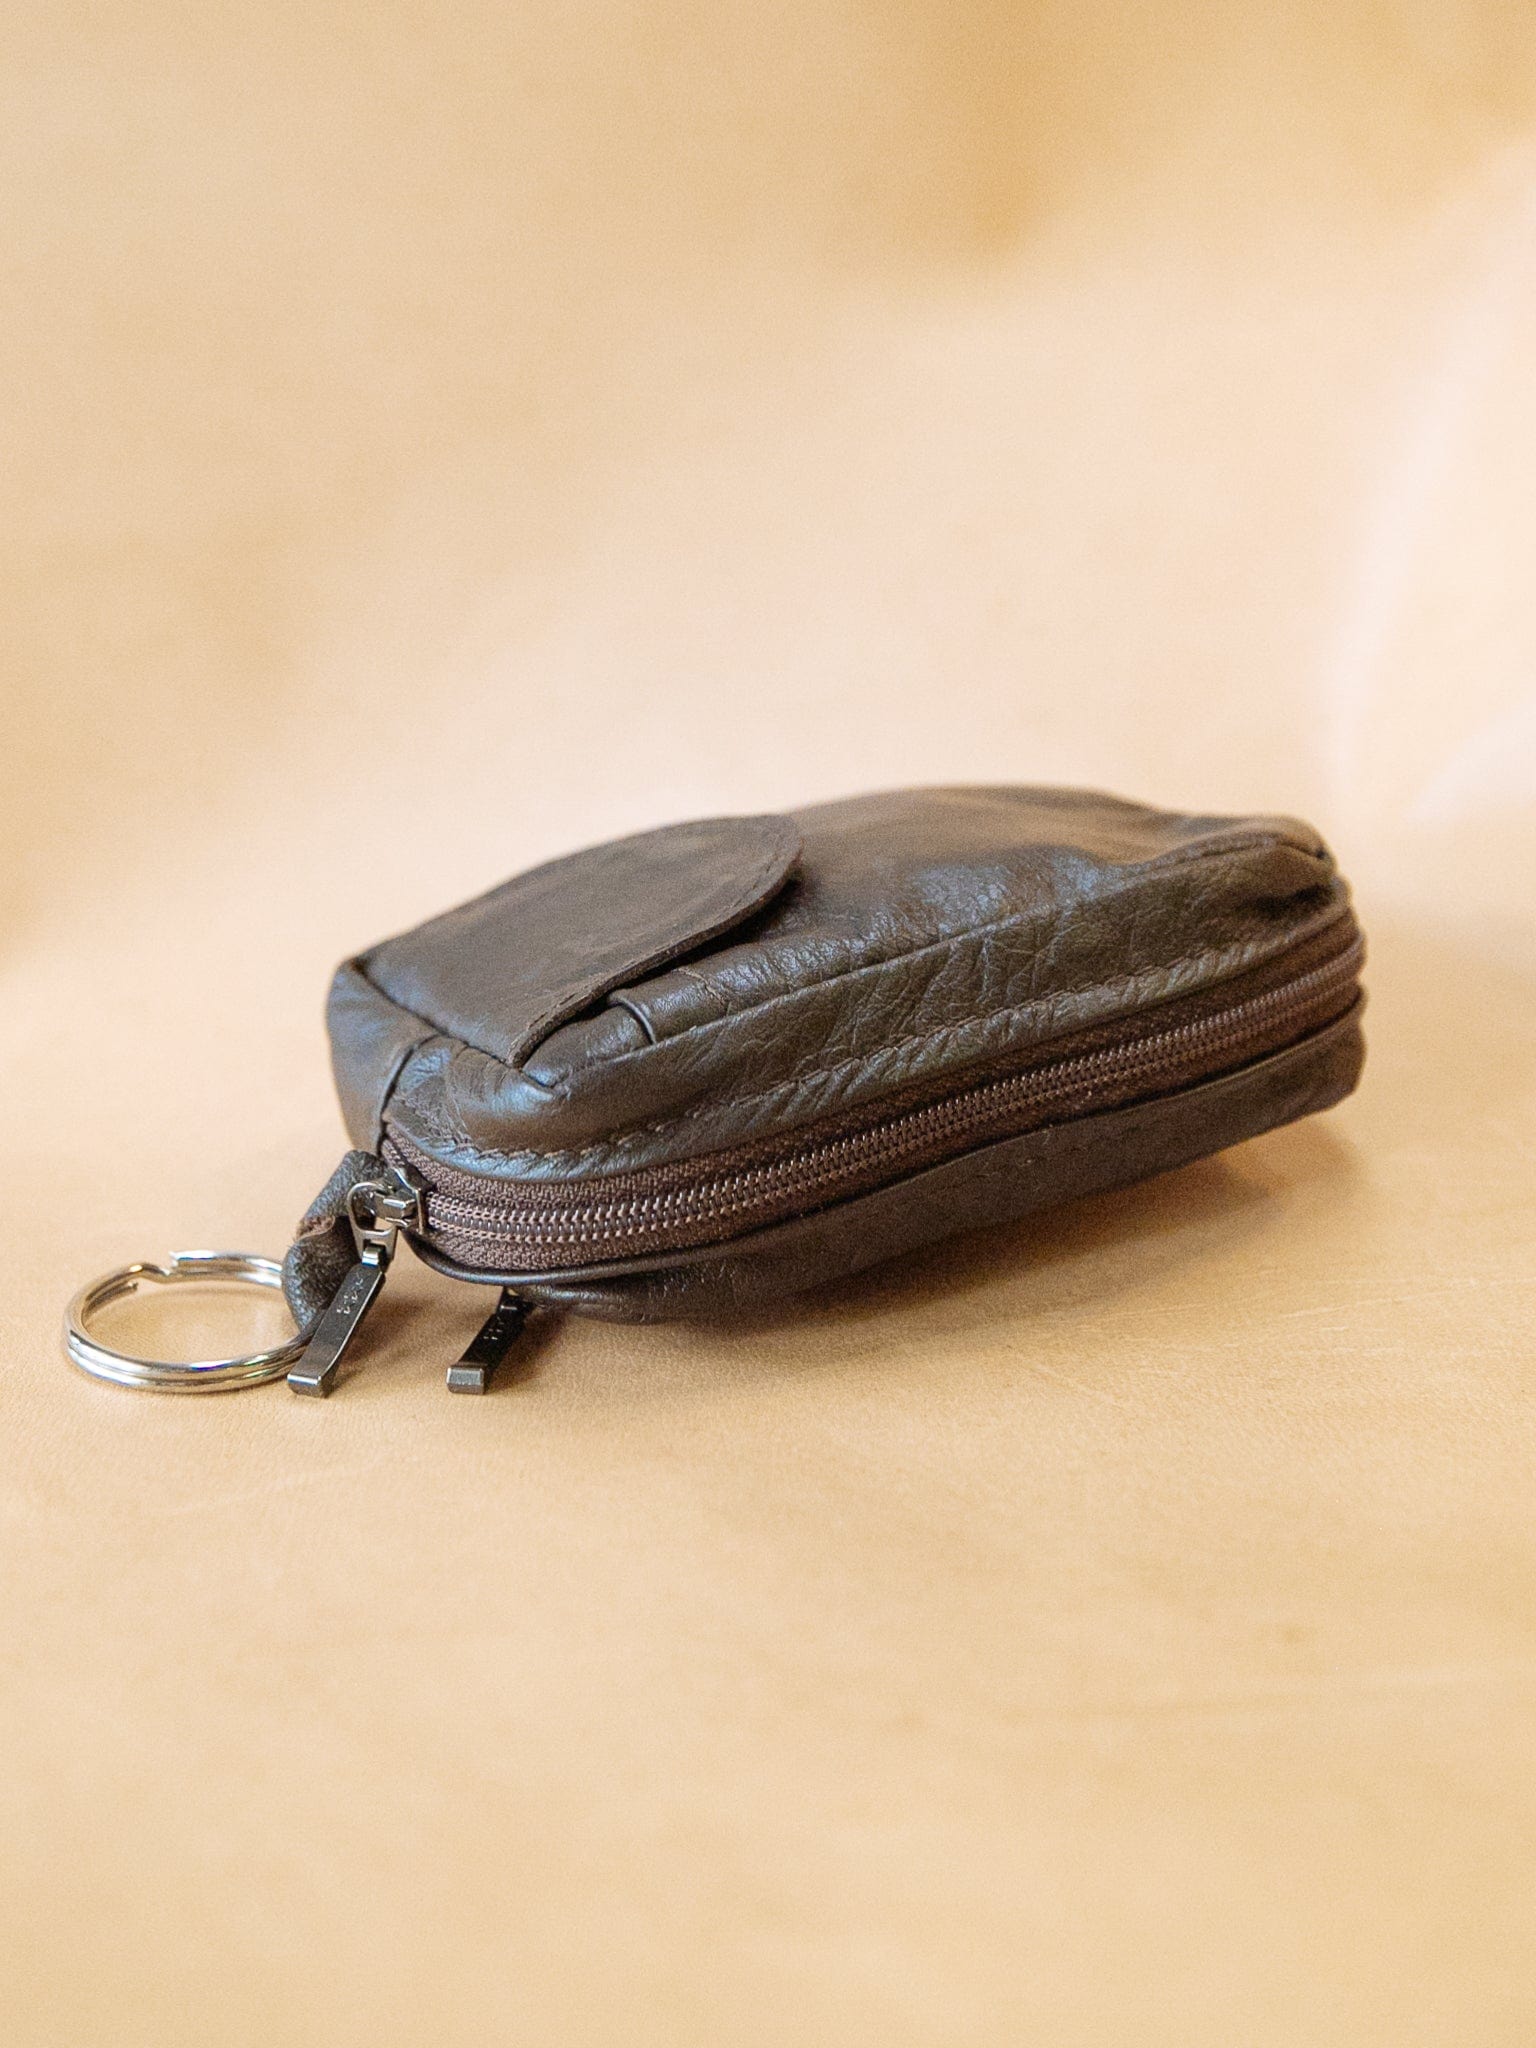 The Real McCaul Coin Purse Key Case Card Holder Wallet - Cowhide Australian Made Australian Owned Tri-Pocket Leather Pouch 